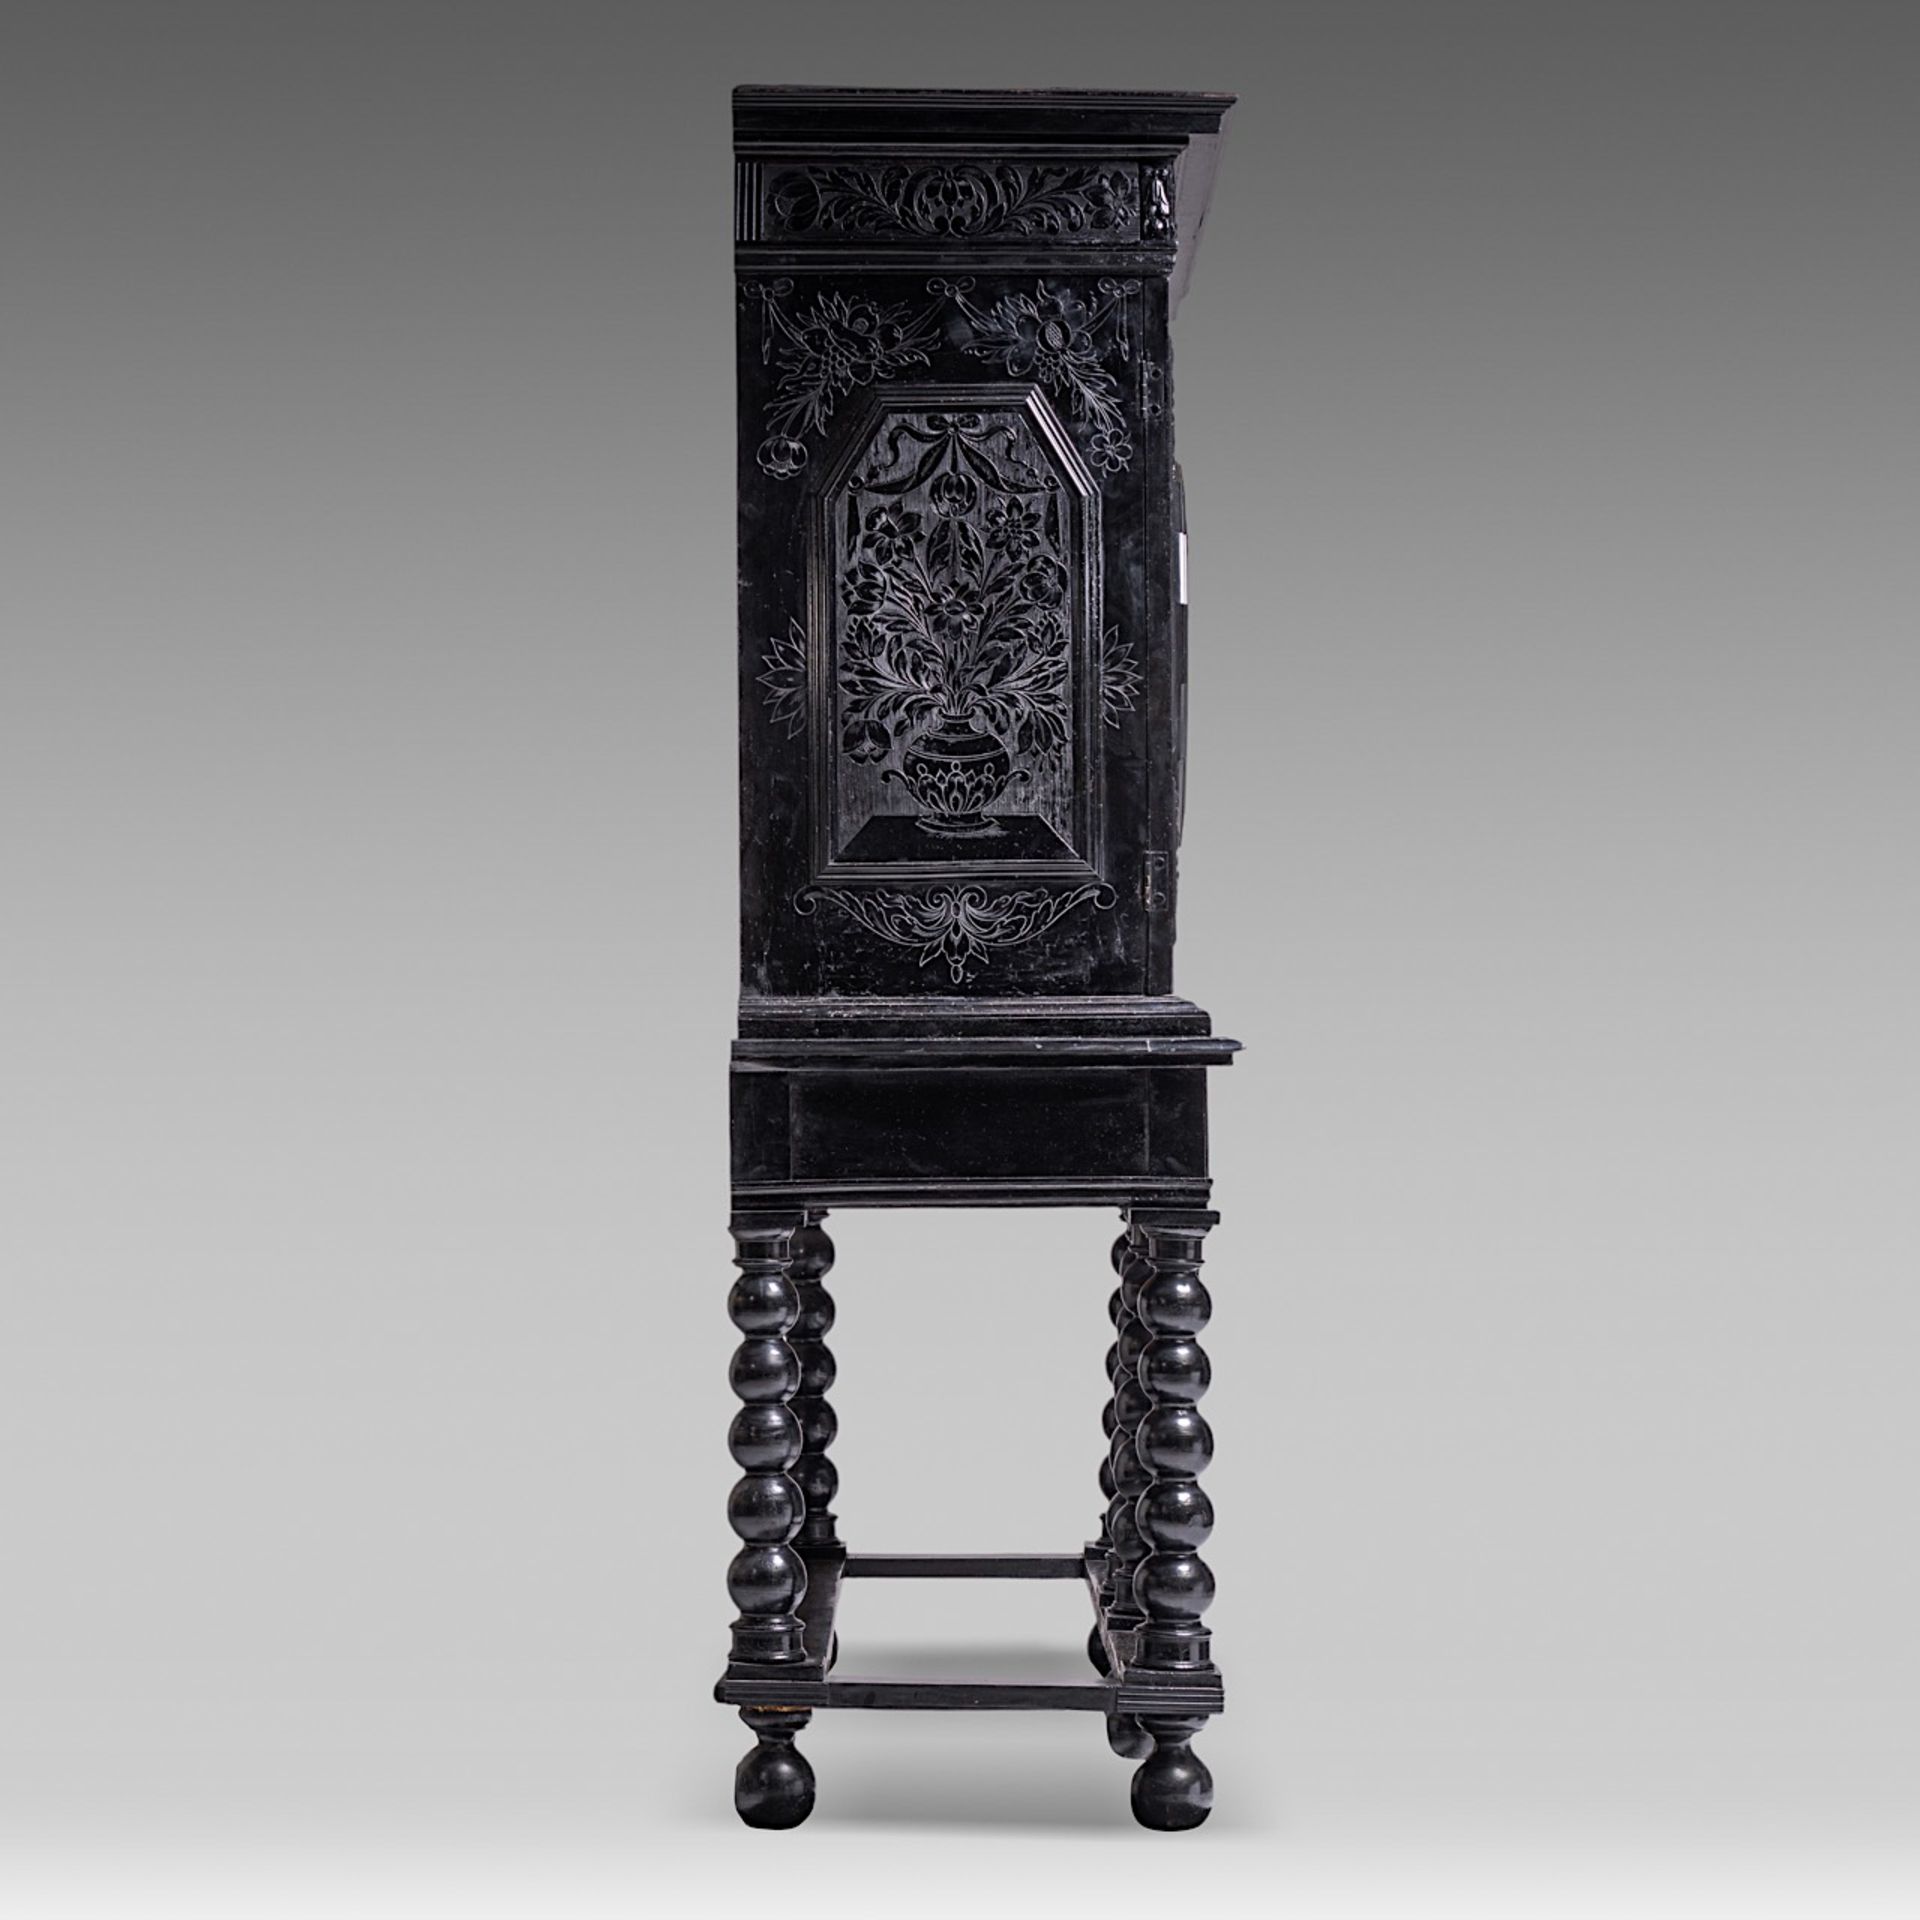 PREMIUM LOT - An exceptional 17thC French ebony and ebonised cabinet-on-stand, H 181,5 - W 163 - D 5 - Bild 7 aus 14